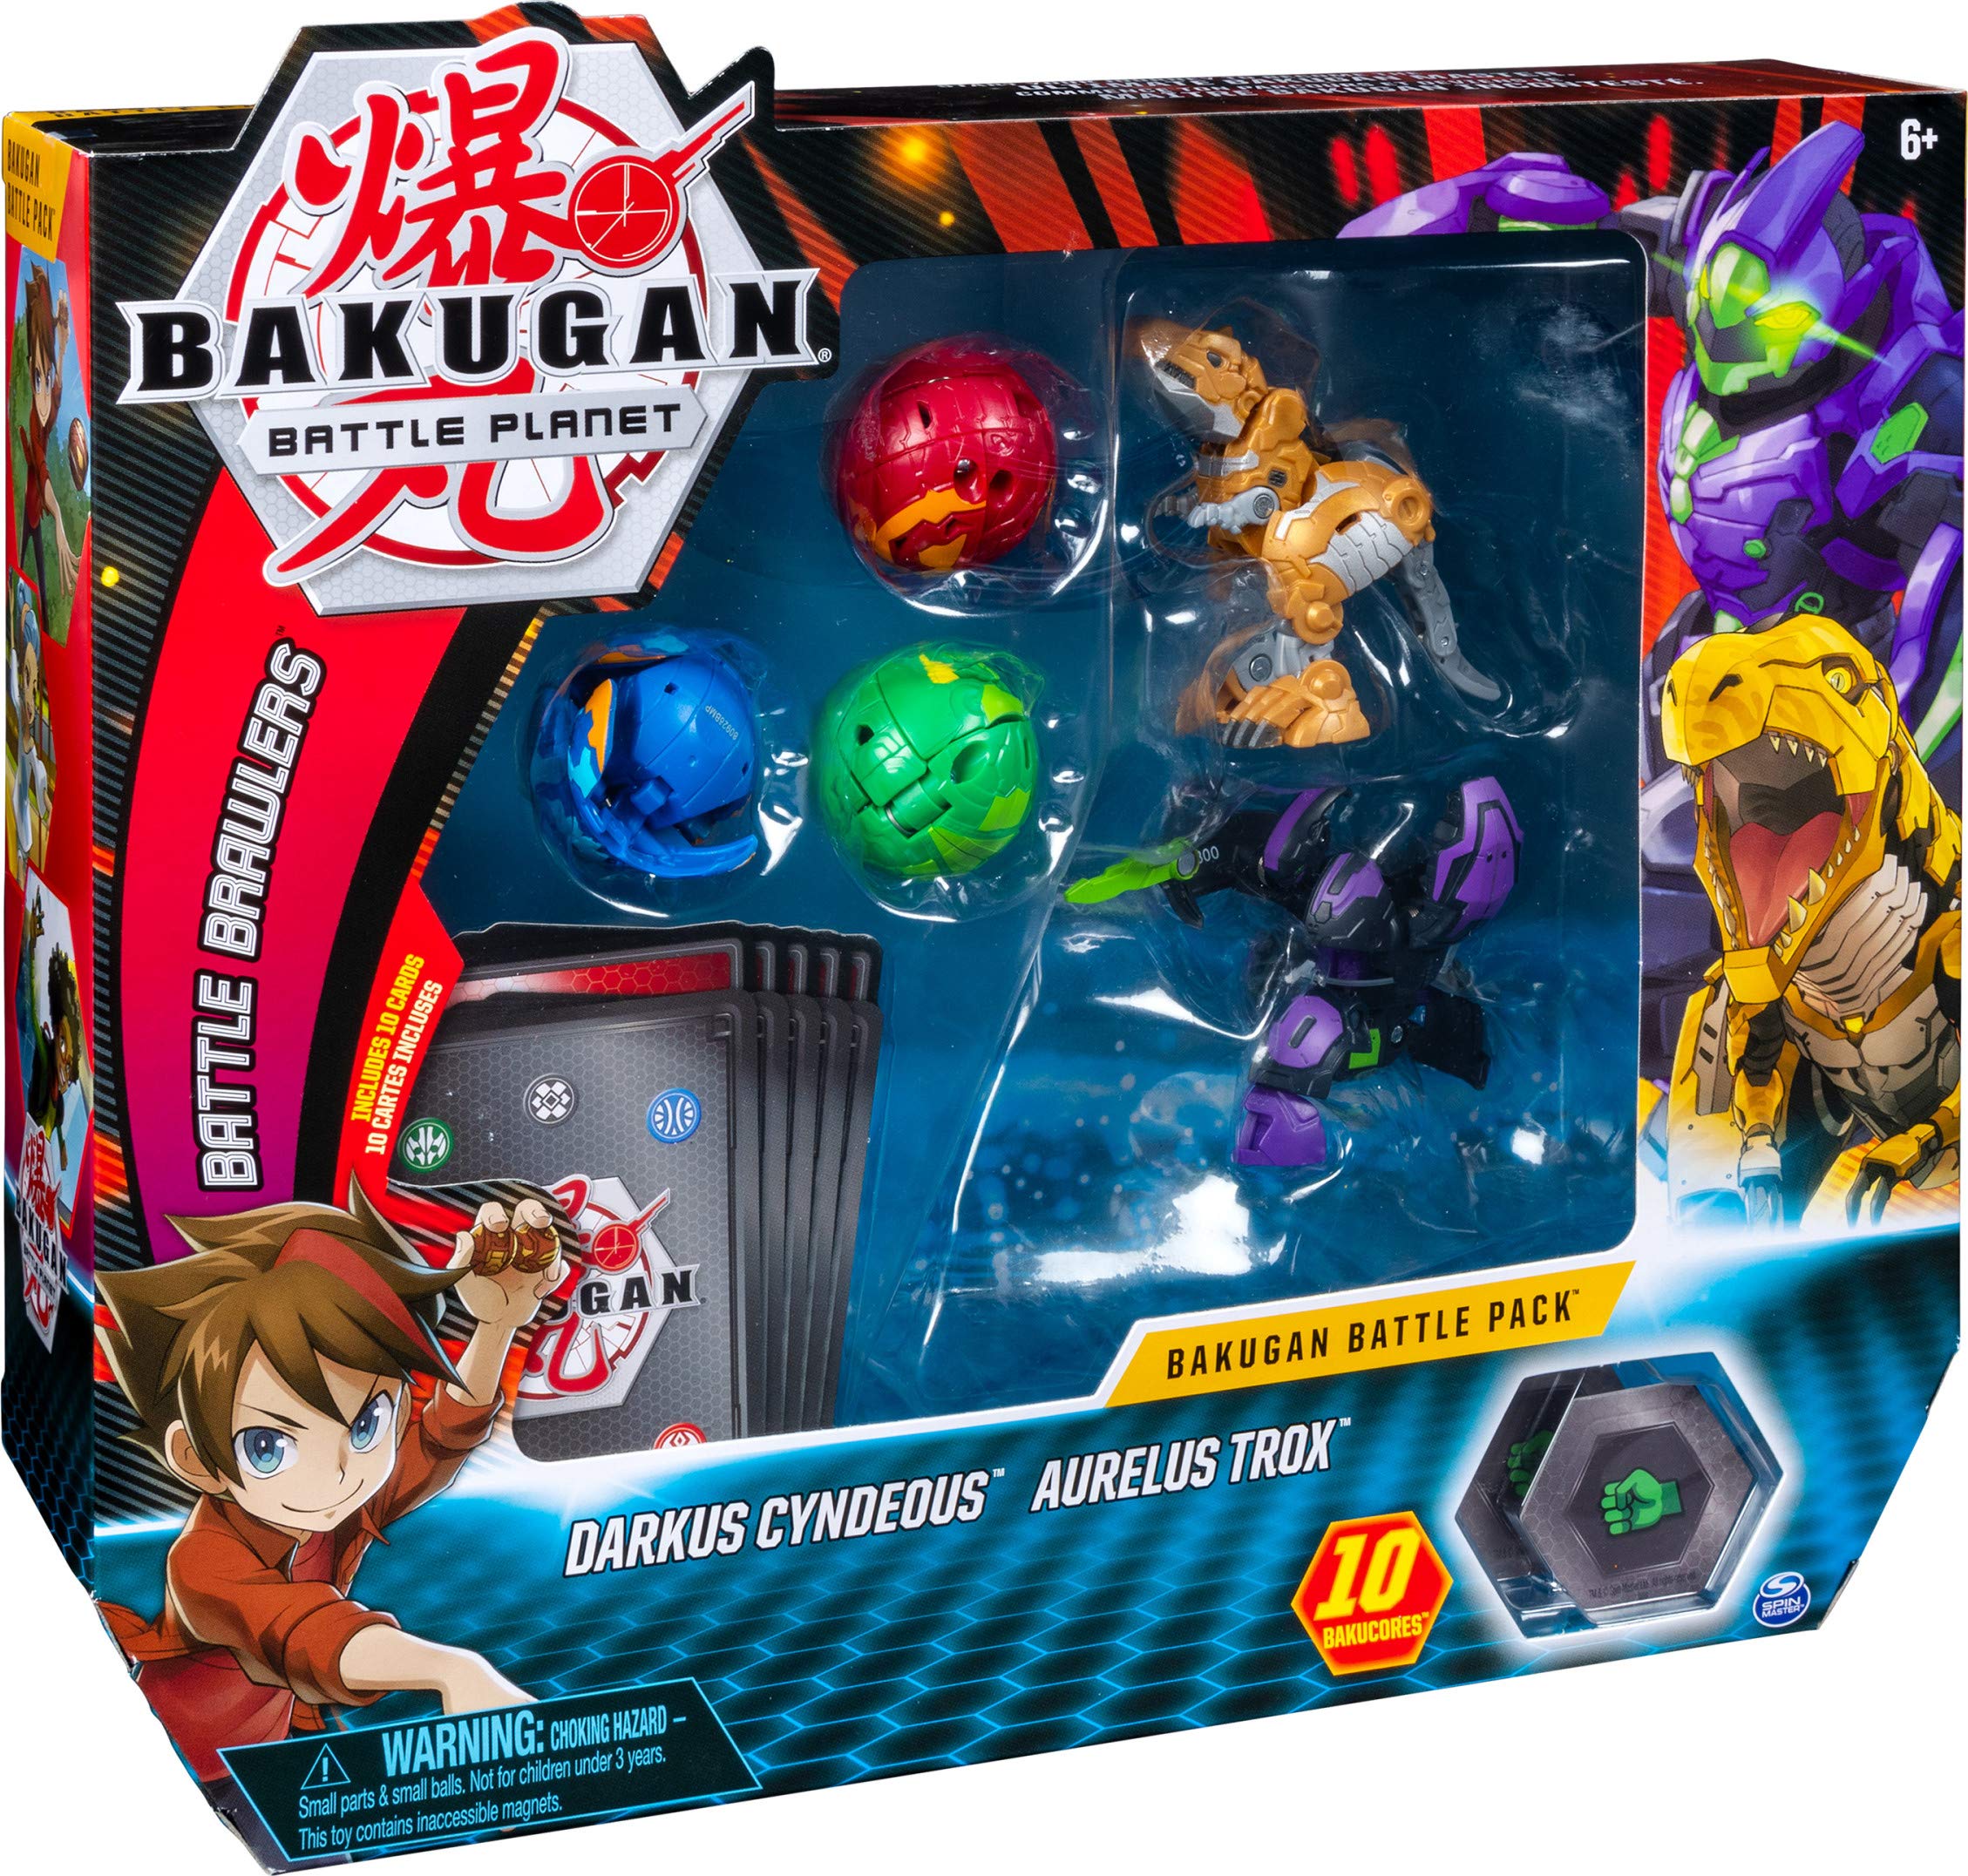 Bakugan, Battle Pack 5 Pack, Darkus Cyndeous & Aurelus Trox, Collectible Cards & Figures, for Ages 6 & Up